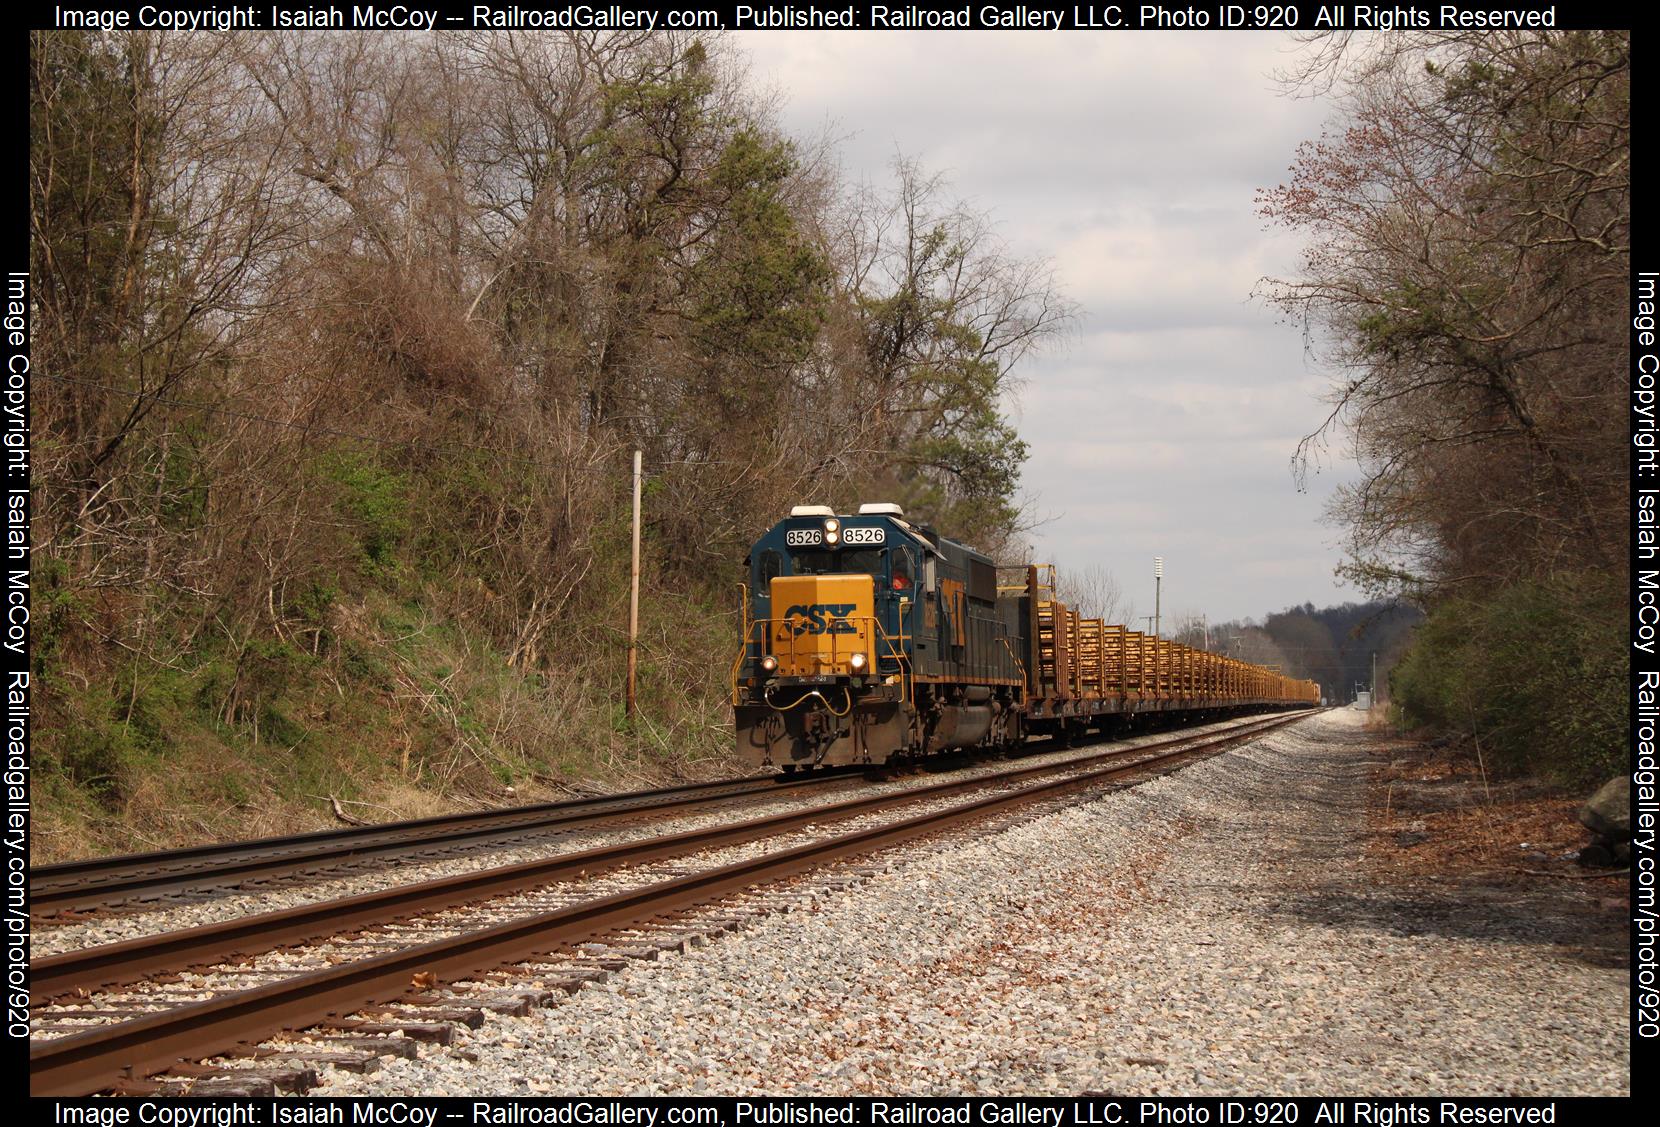 8526 (RM unknown) is a class EMD SD50 and  is pictured in Hurricane, West Virginia, United States.  This was taken along the Kenova District  on the CSX Transportation. Photo Copyright: Isaiah McCoy uploaded to Railroad Gallery on 04/04/2023. This photograph of 8526 (RM unknown) was taken on Tuesday, April 04, 2023. All Rights Reserved. 